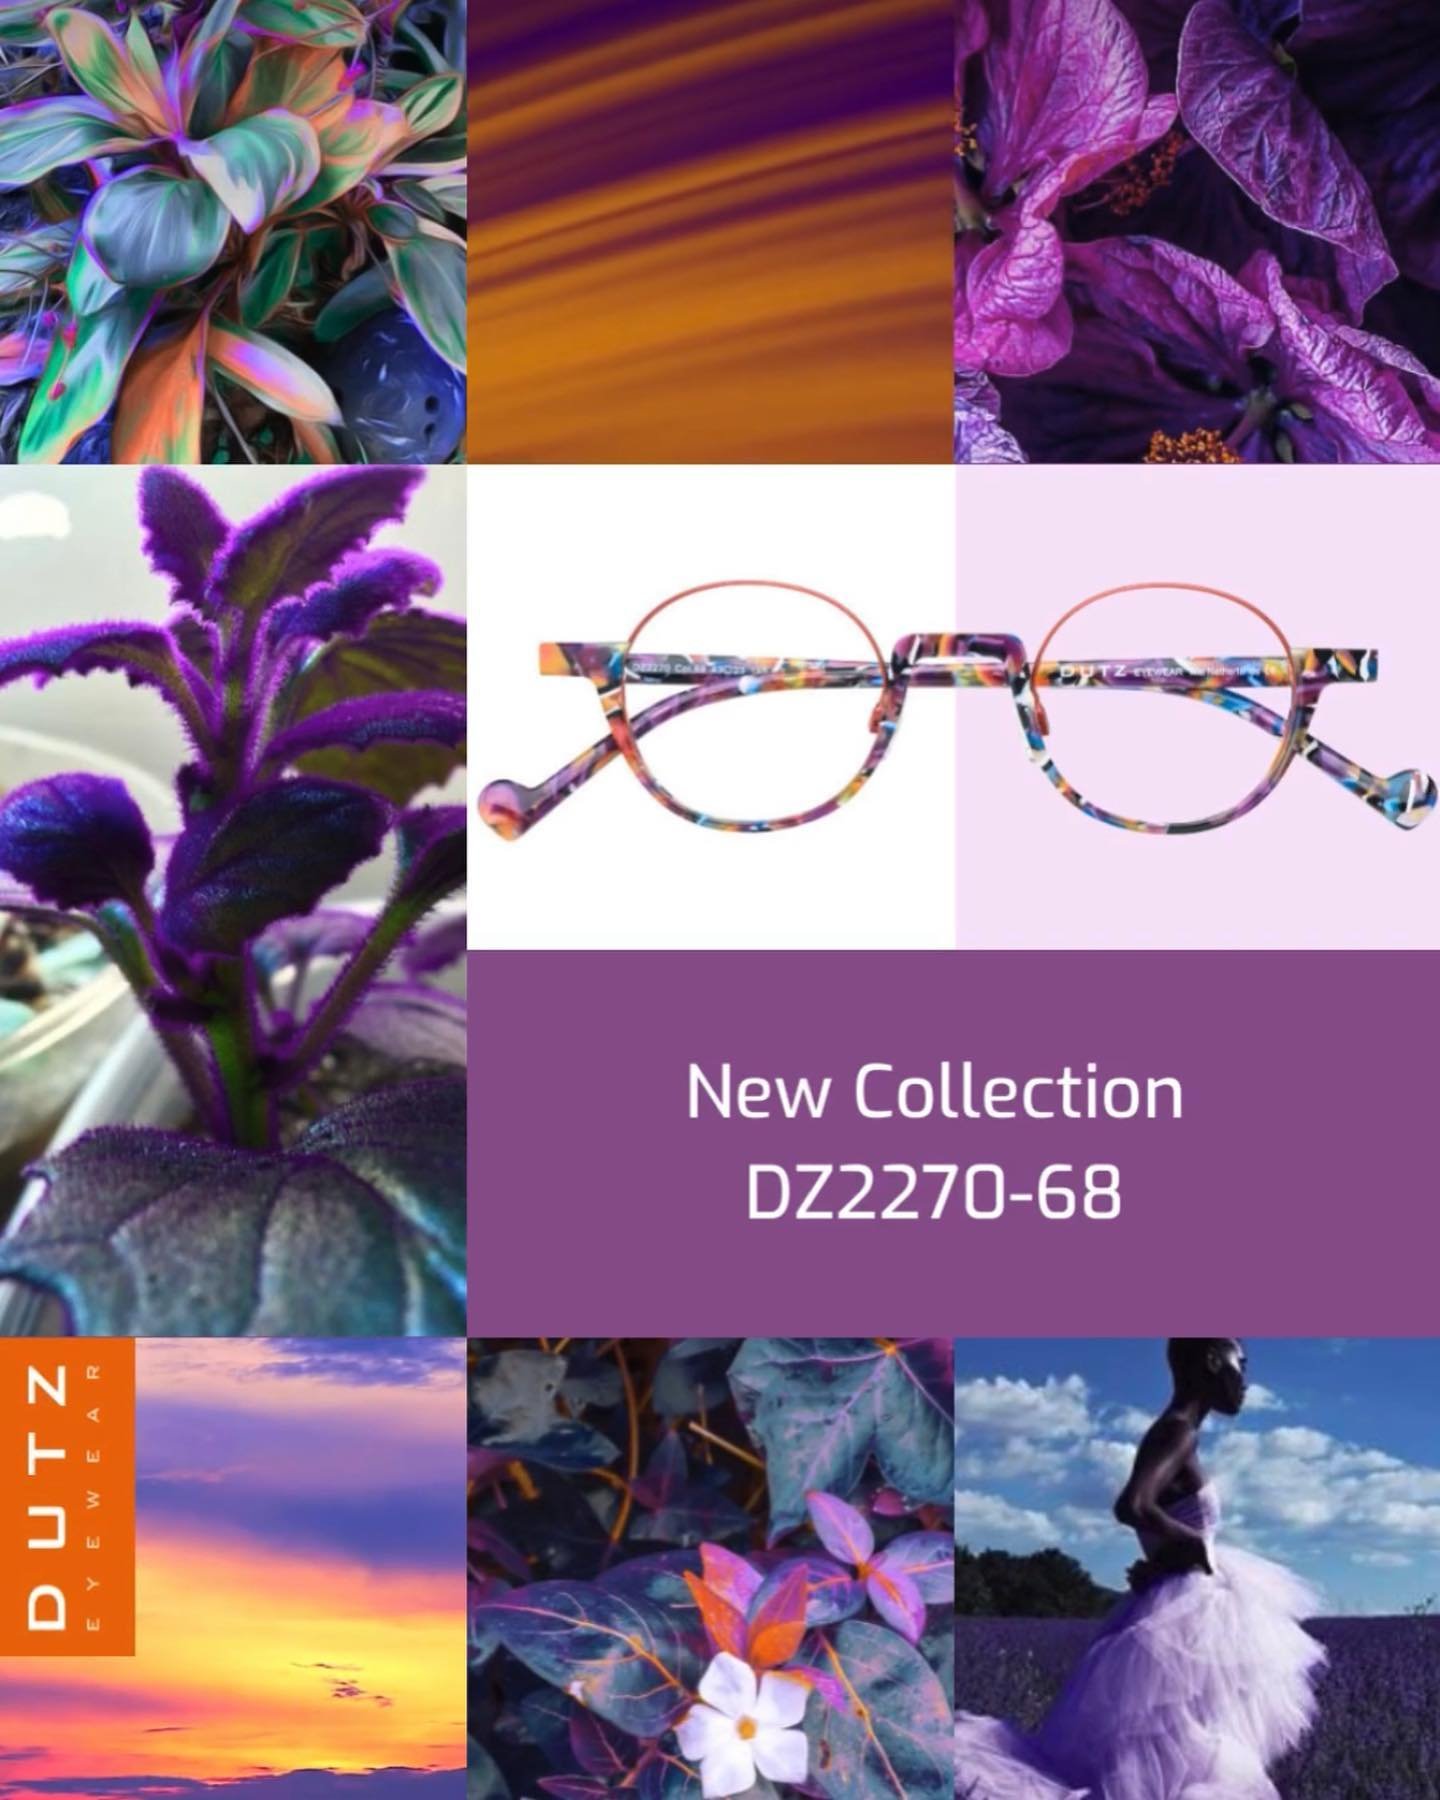 Dutz eyewear make color magic when you wear our frame funky look, color unique,design with passion 	#EyewearFashion#EyewearStyle#OpticalFashion 	#BoutiqueEyewear #EyewearDesign#FrameFashion	#OpticalStyle#EyewearDesigner	#FashionFrames#BoutiqueOptical